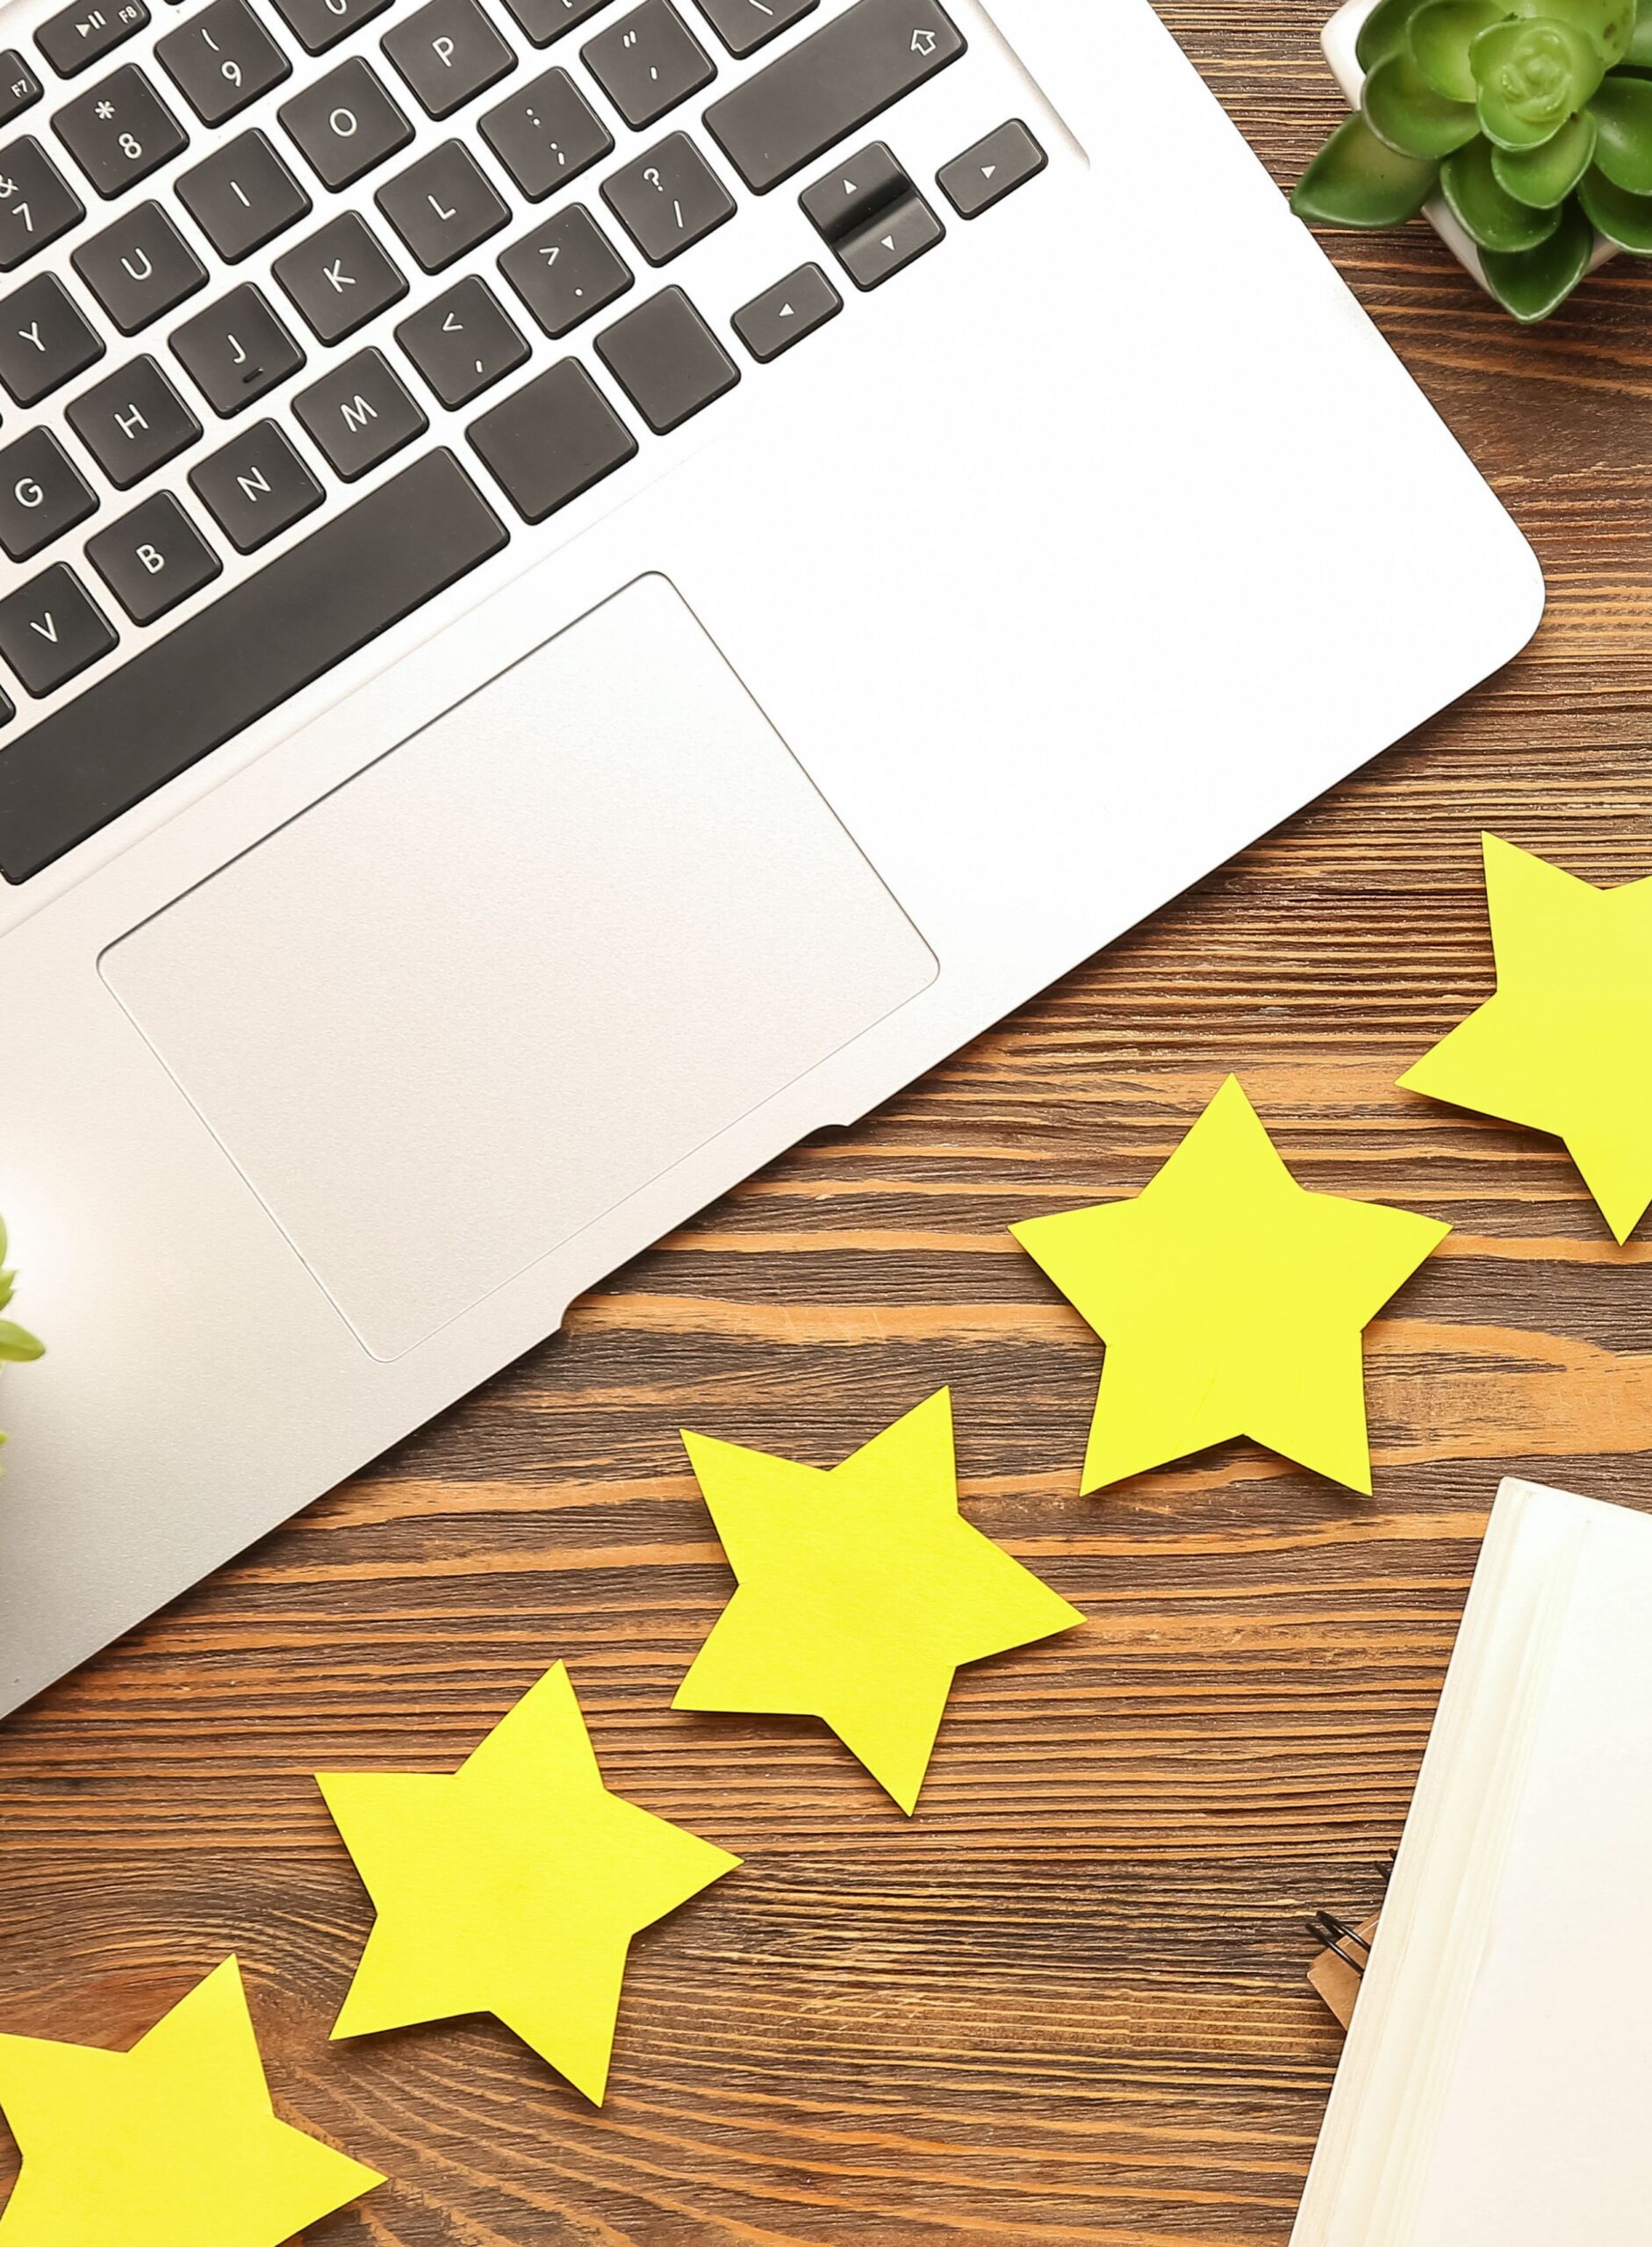 Laptop with paper stars scattered around, illustrating strategies for enhancing customer service in small businesses.